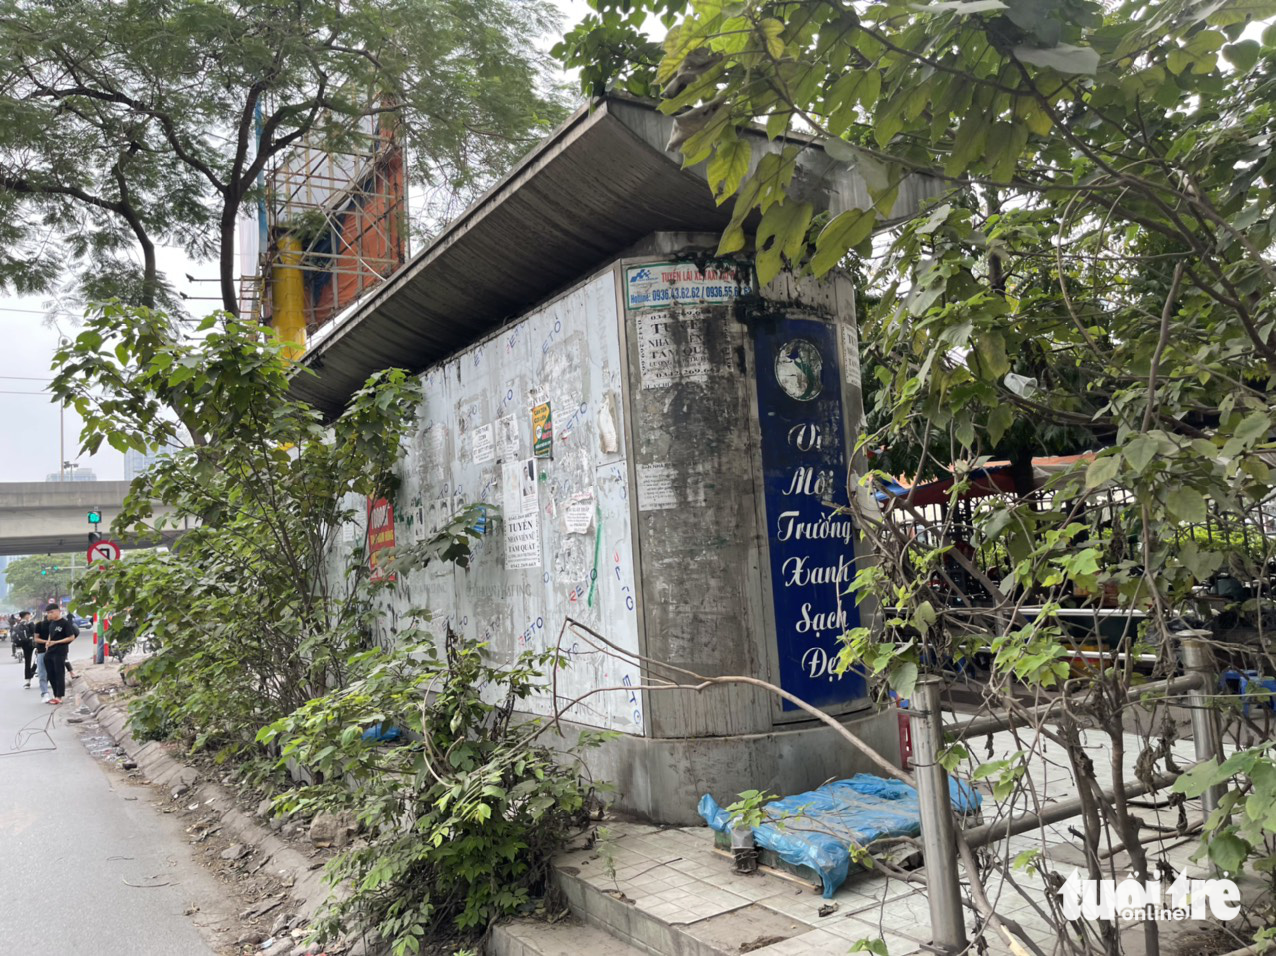 A public toilet is overgrown with wild plants on Nguyen Hoang Street in Nam Tu Liem District, Hanoi. Photo: Pham Tuan / Tuoi Tre